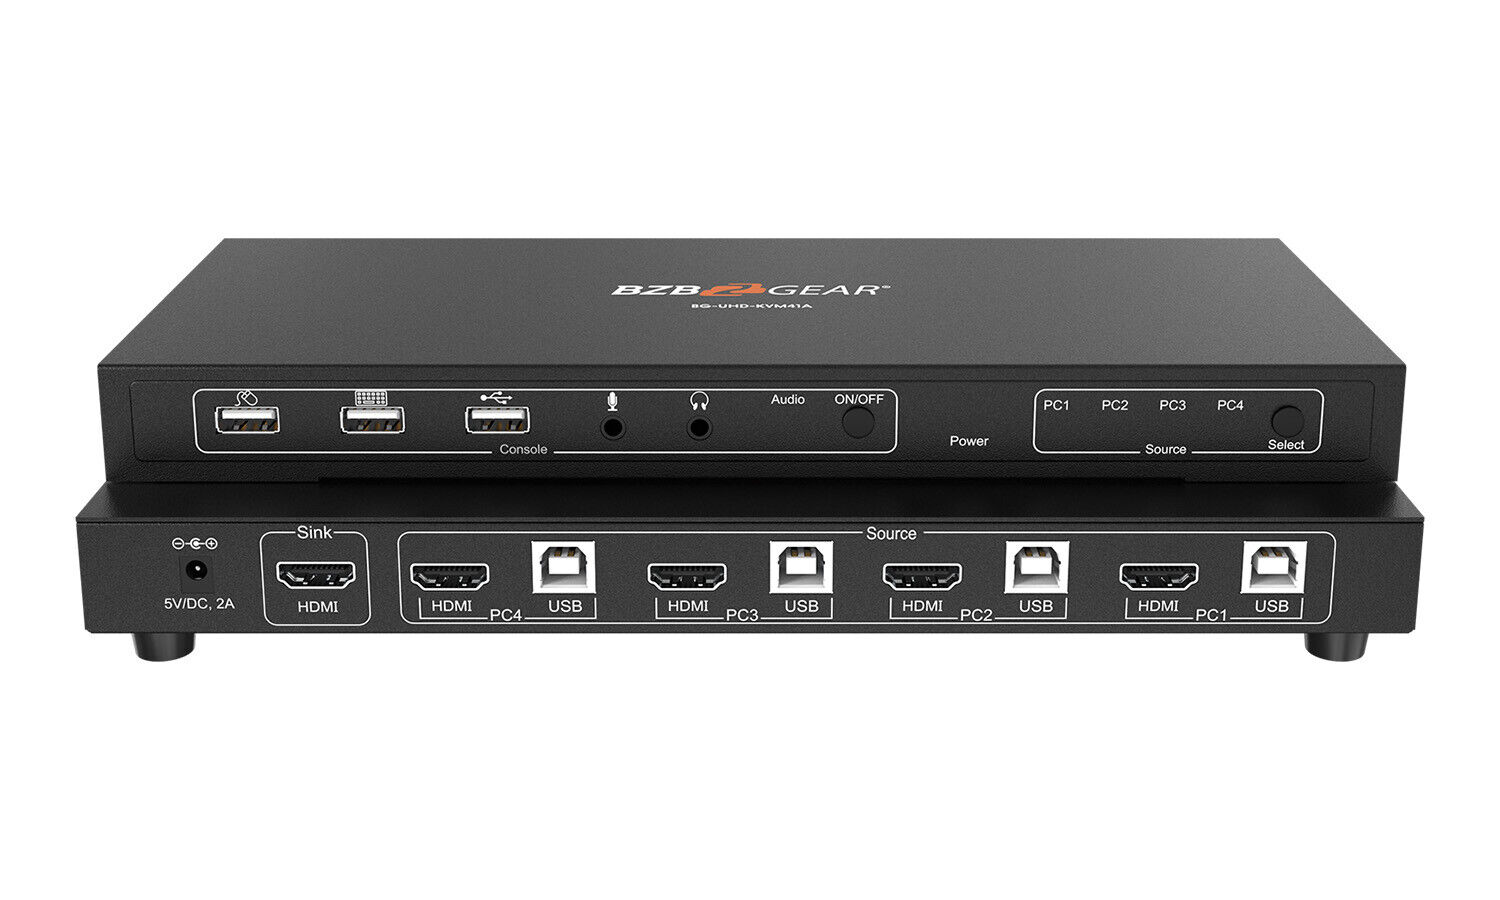 BZBGEAR 4x1 4K KVM Switcher with USB2.0 Ports for Peripherals and Audio Support